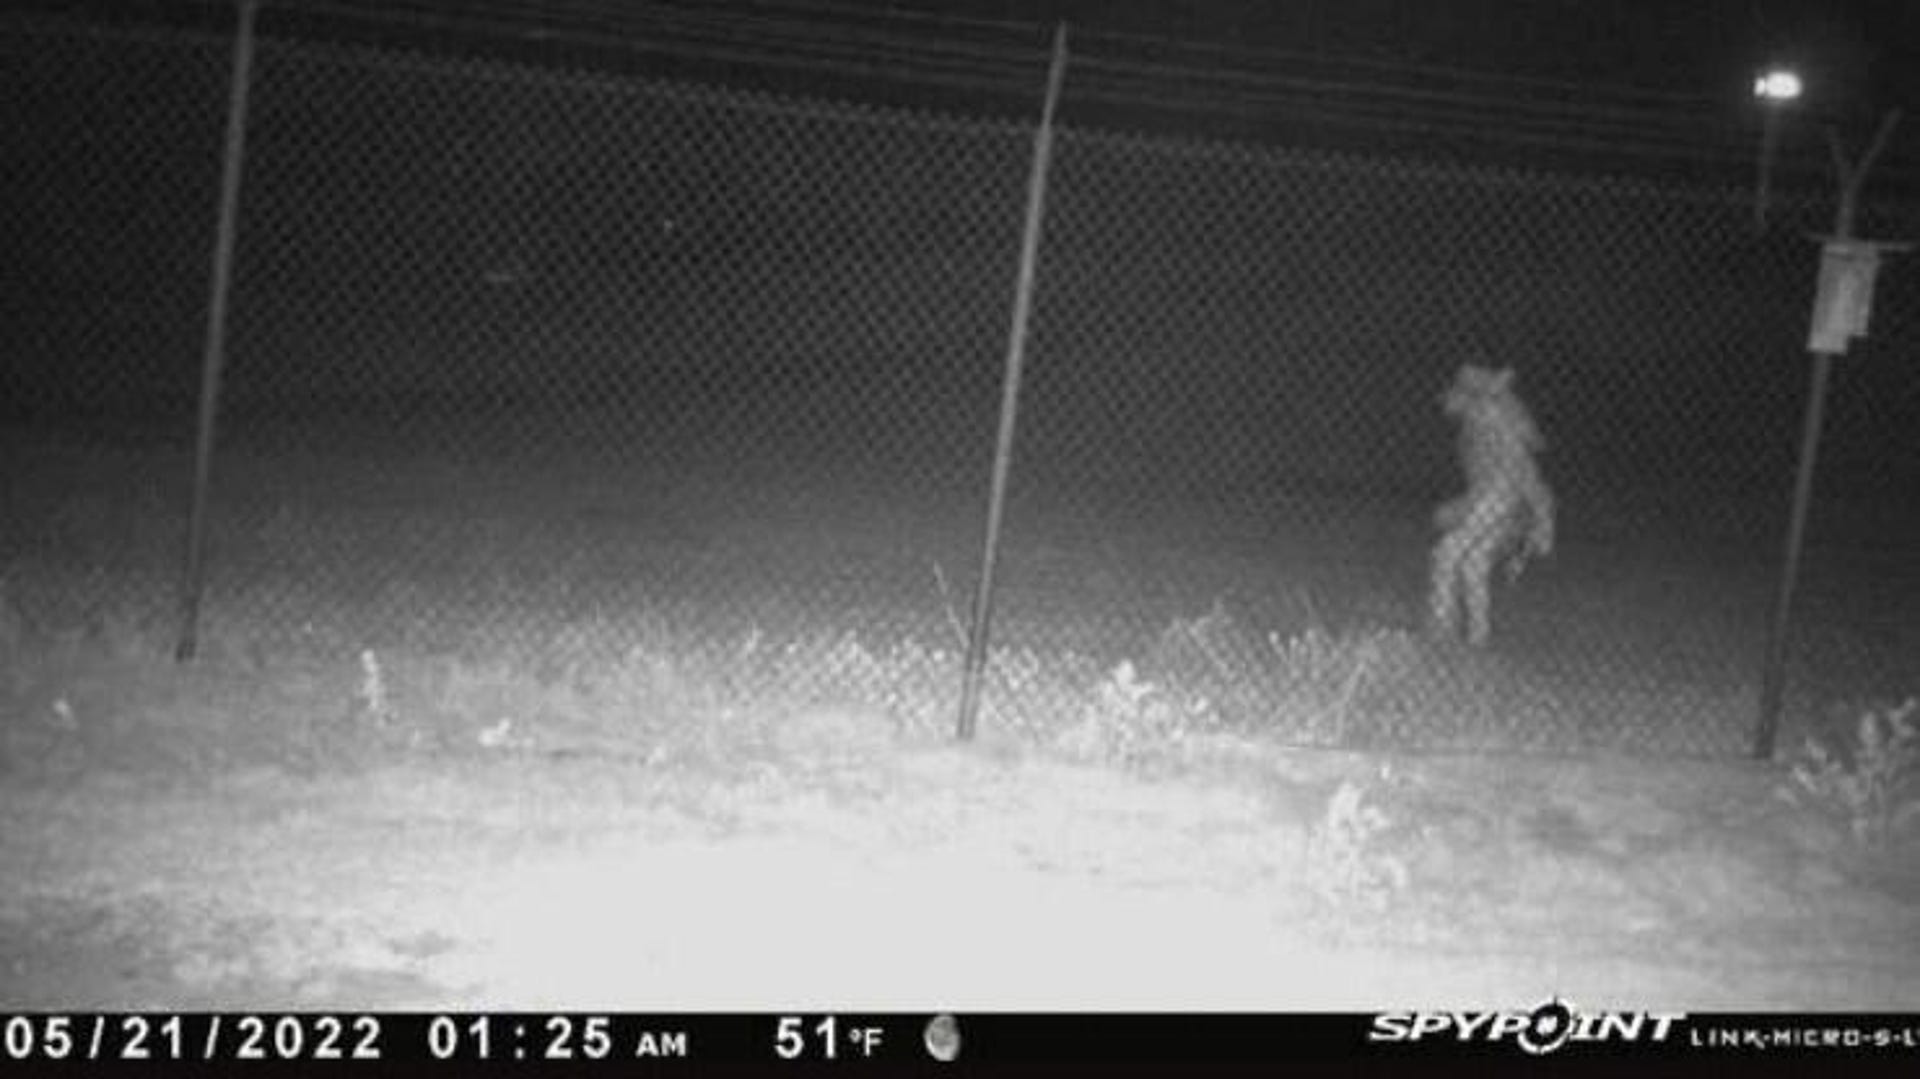 Black and white camera image of a strange humanoid figure on the other side of a fence.